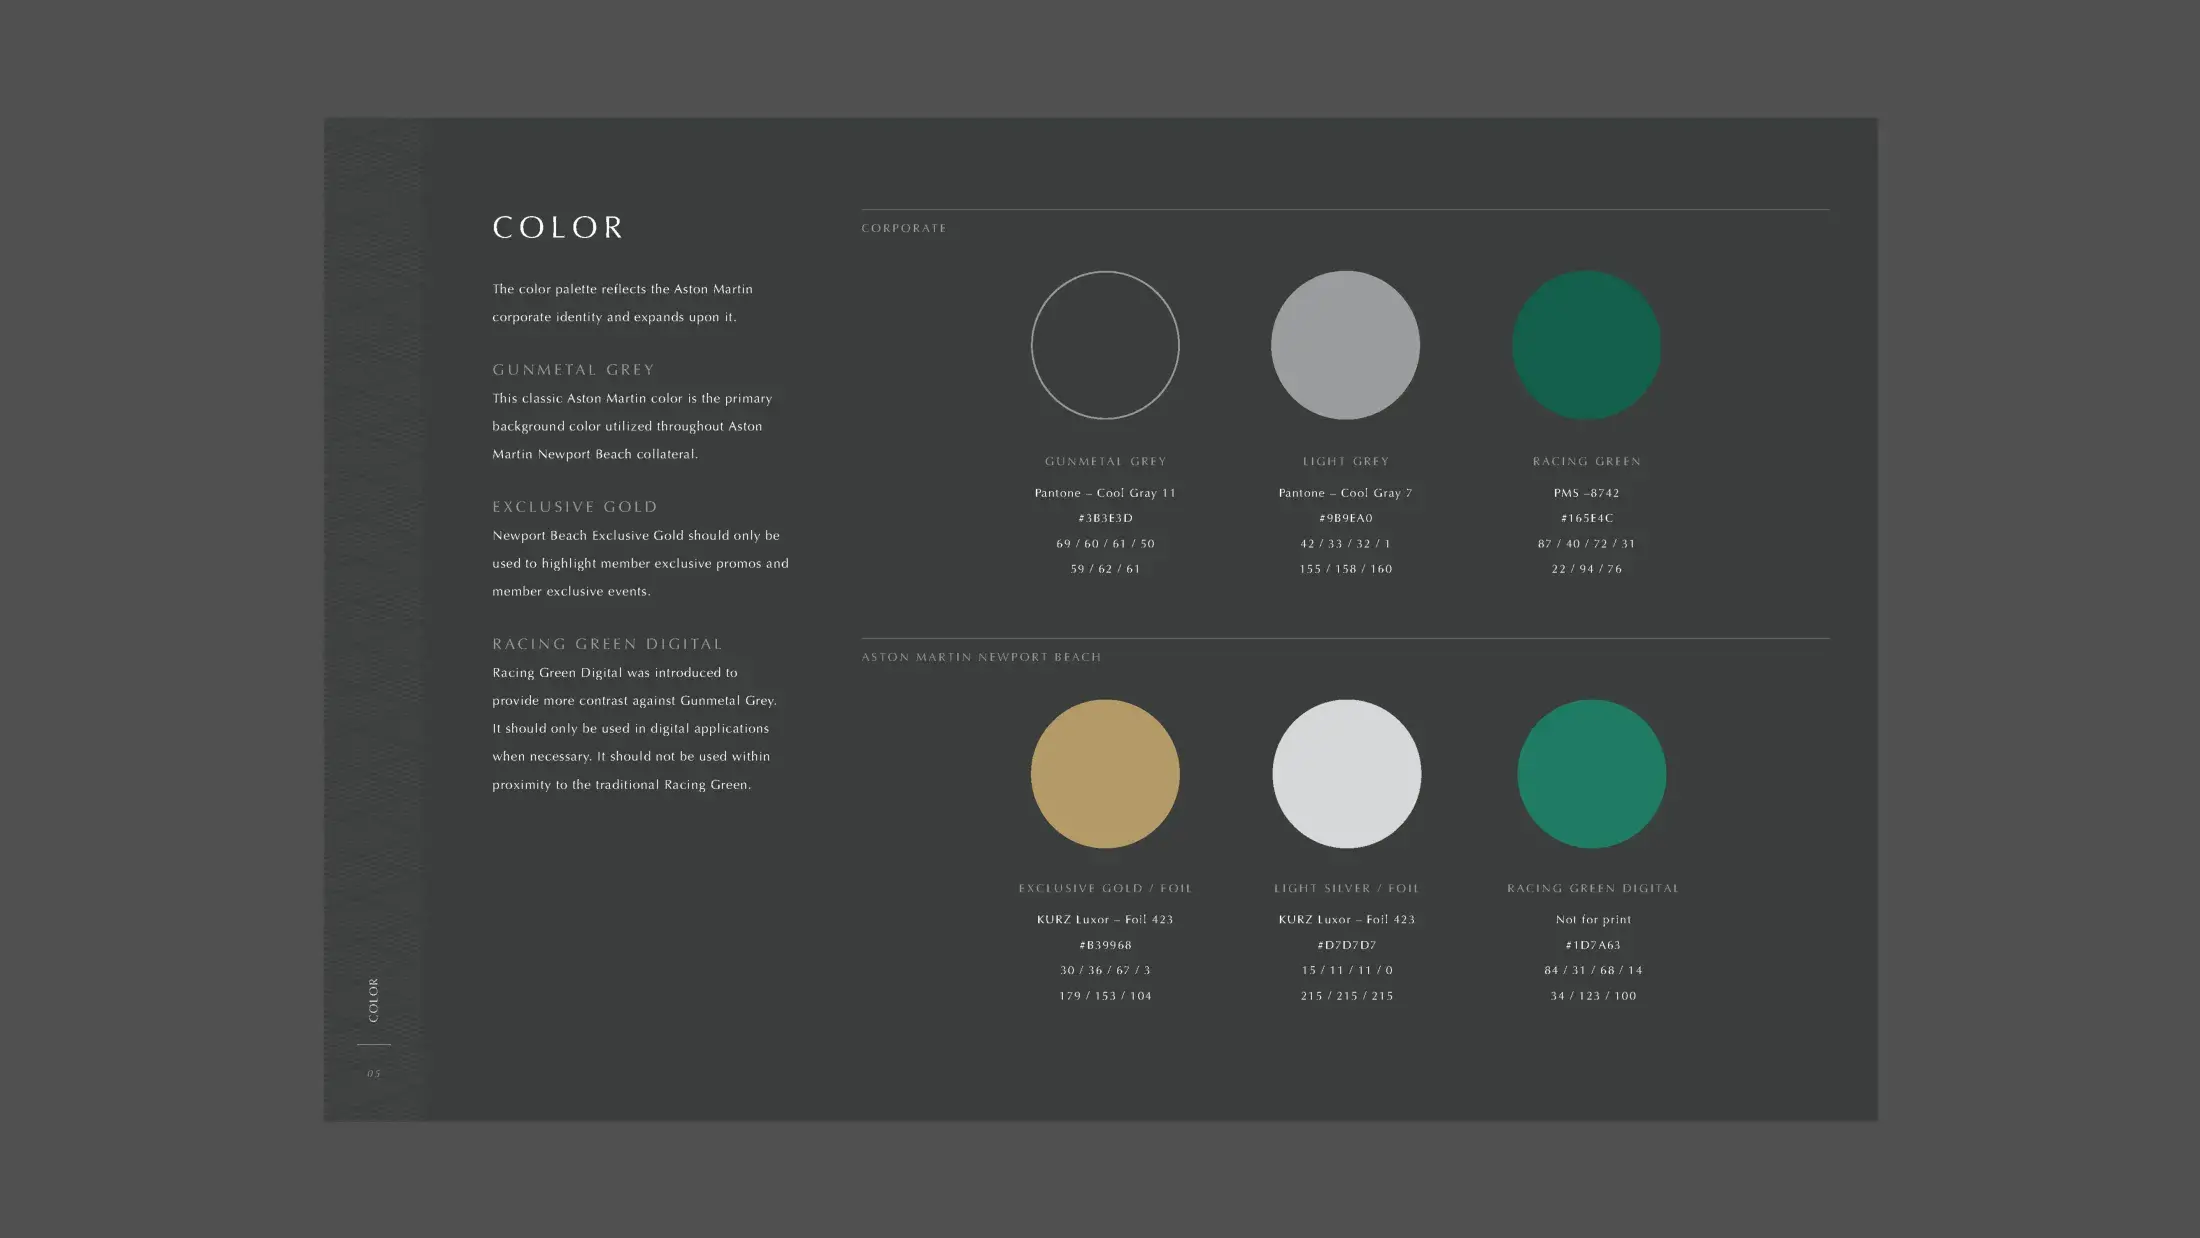 Style guide page on color palette